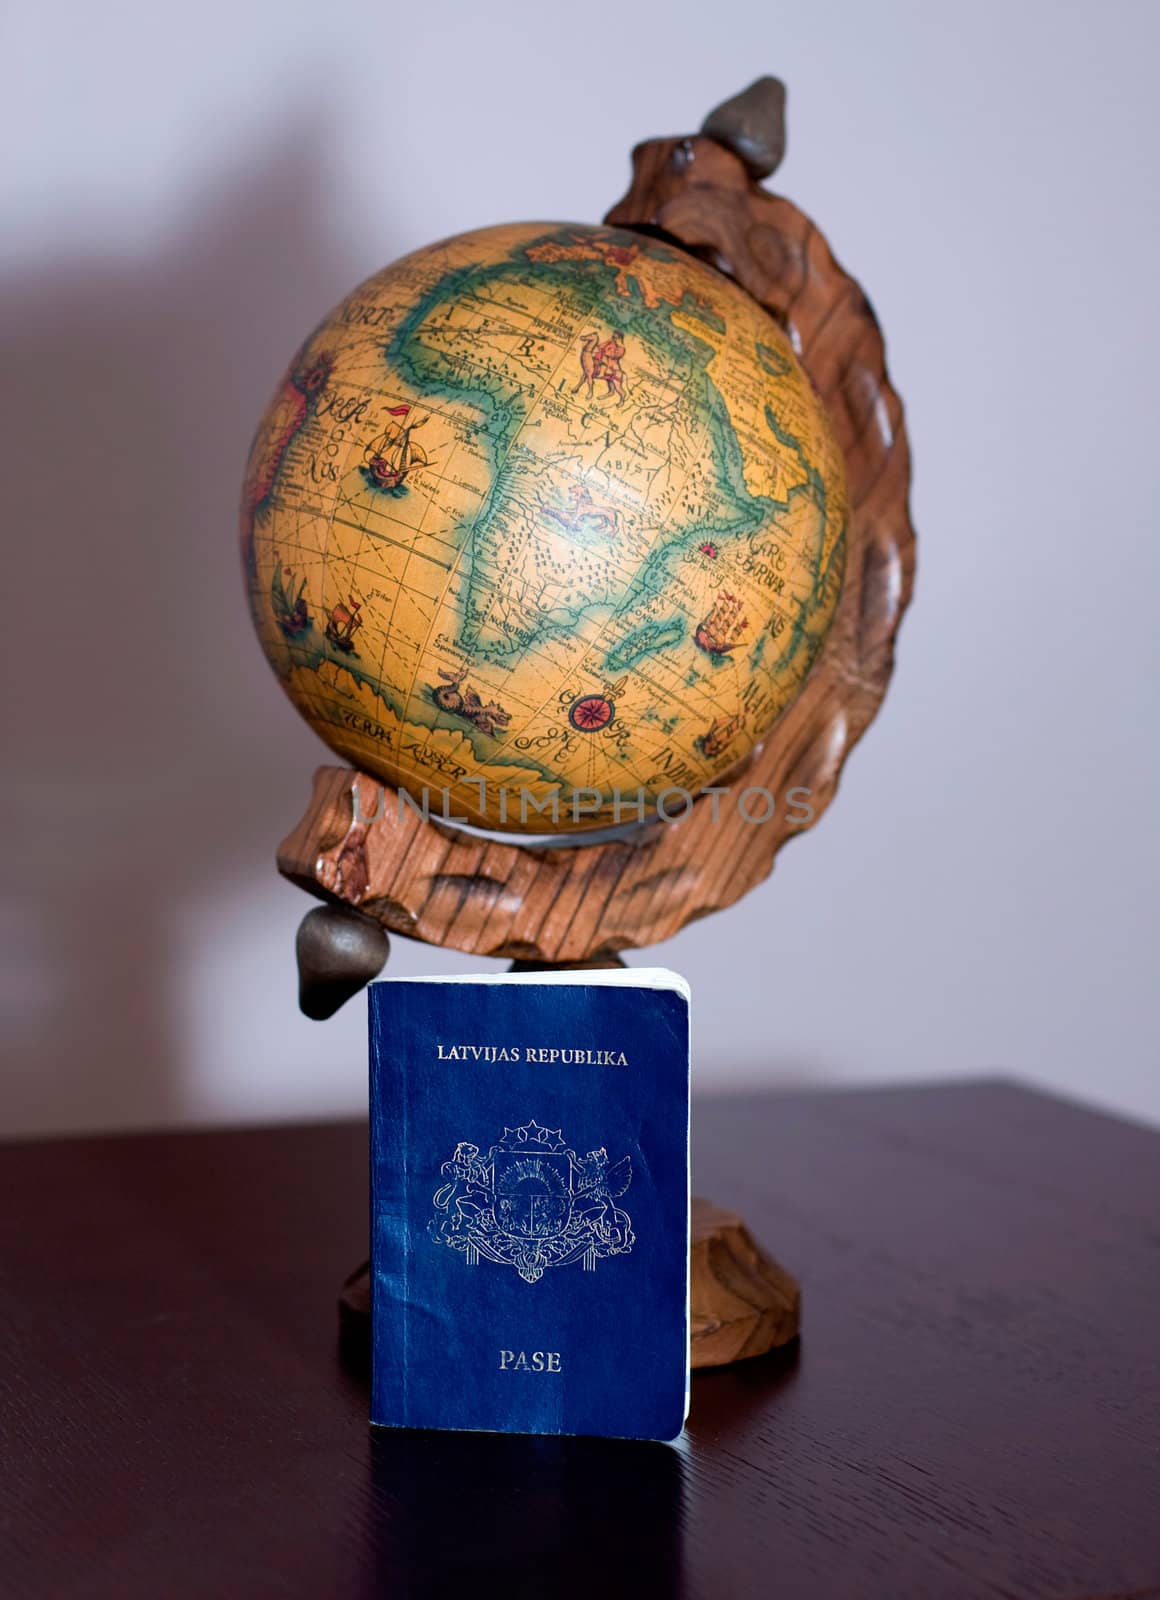 The globe and the passport by desant7474